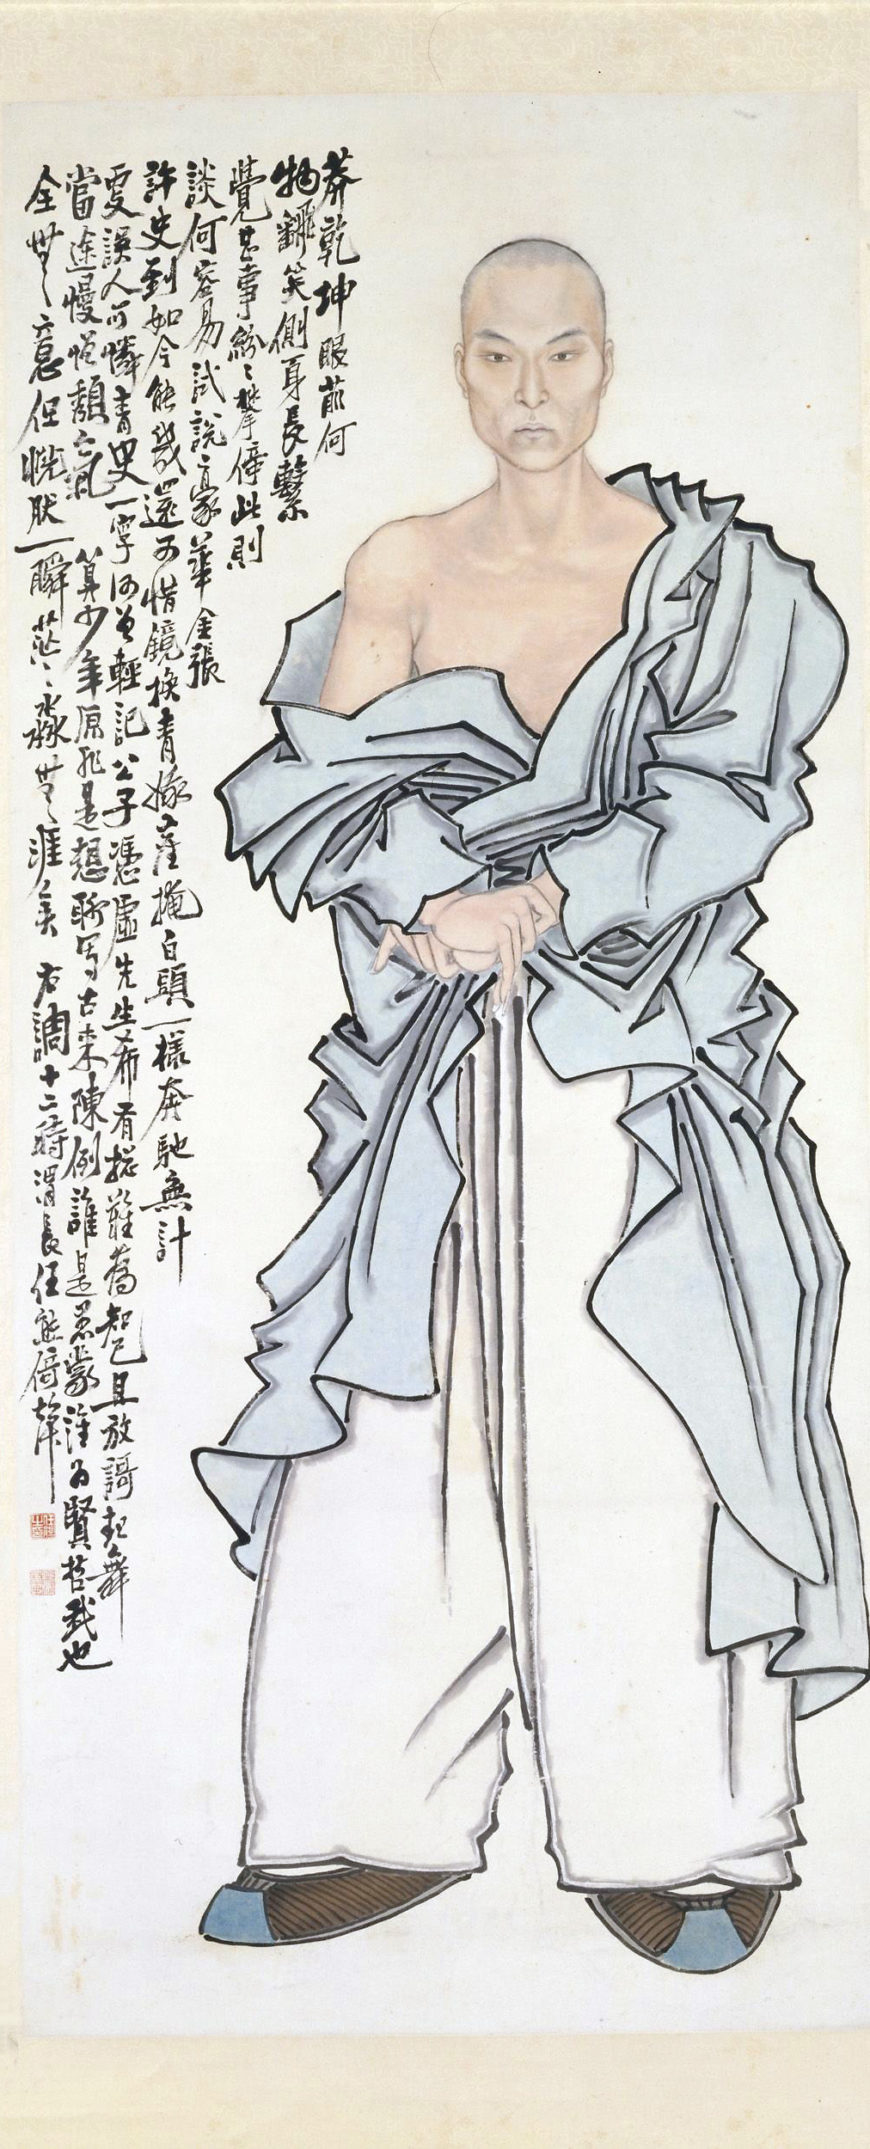 Ren Xiong (1823–57), Self-Portrait, Qing Dynasty, ink and colors on paper, 177.5 x 78.8 cm (Palace Museum, Beijing)